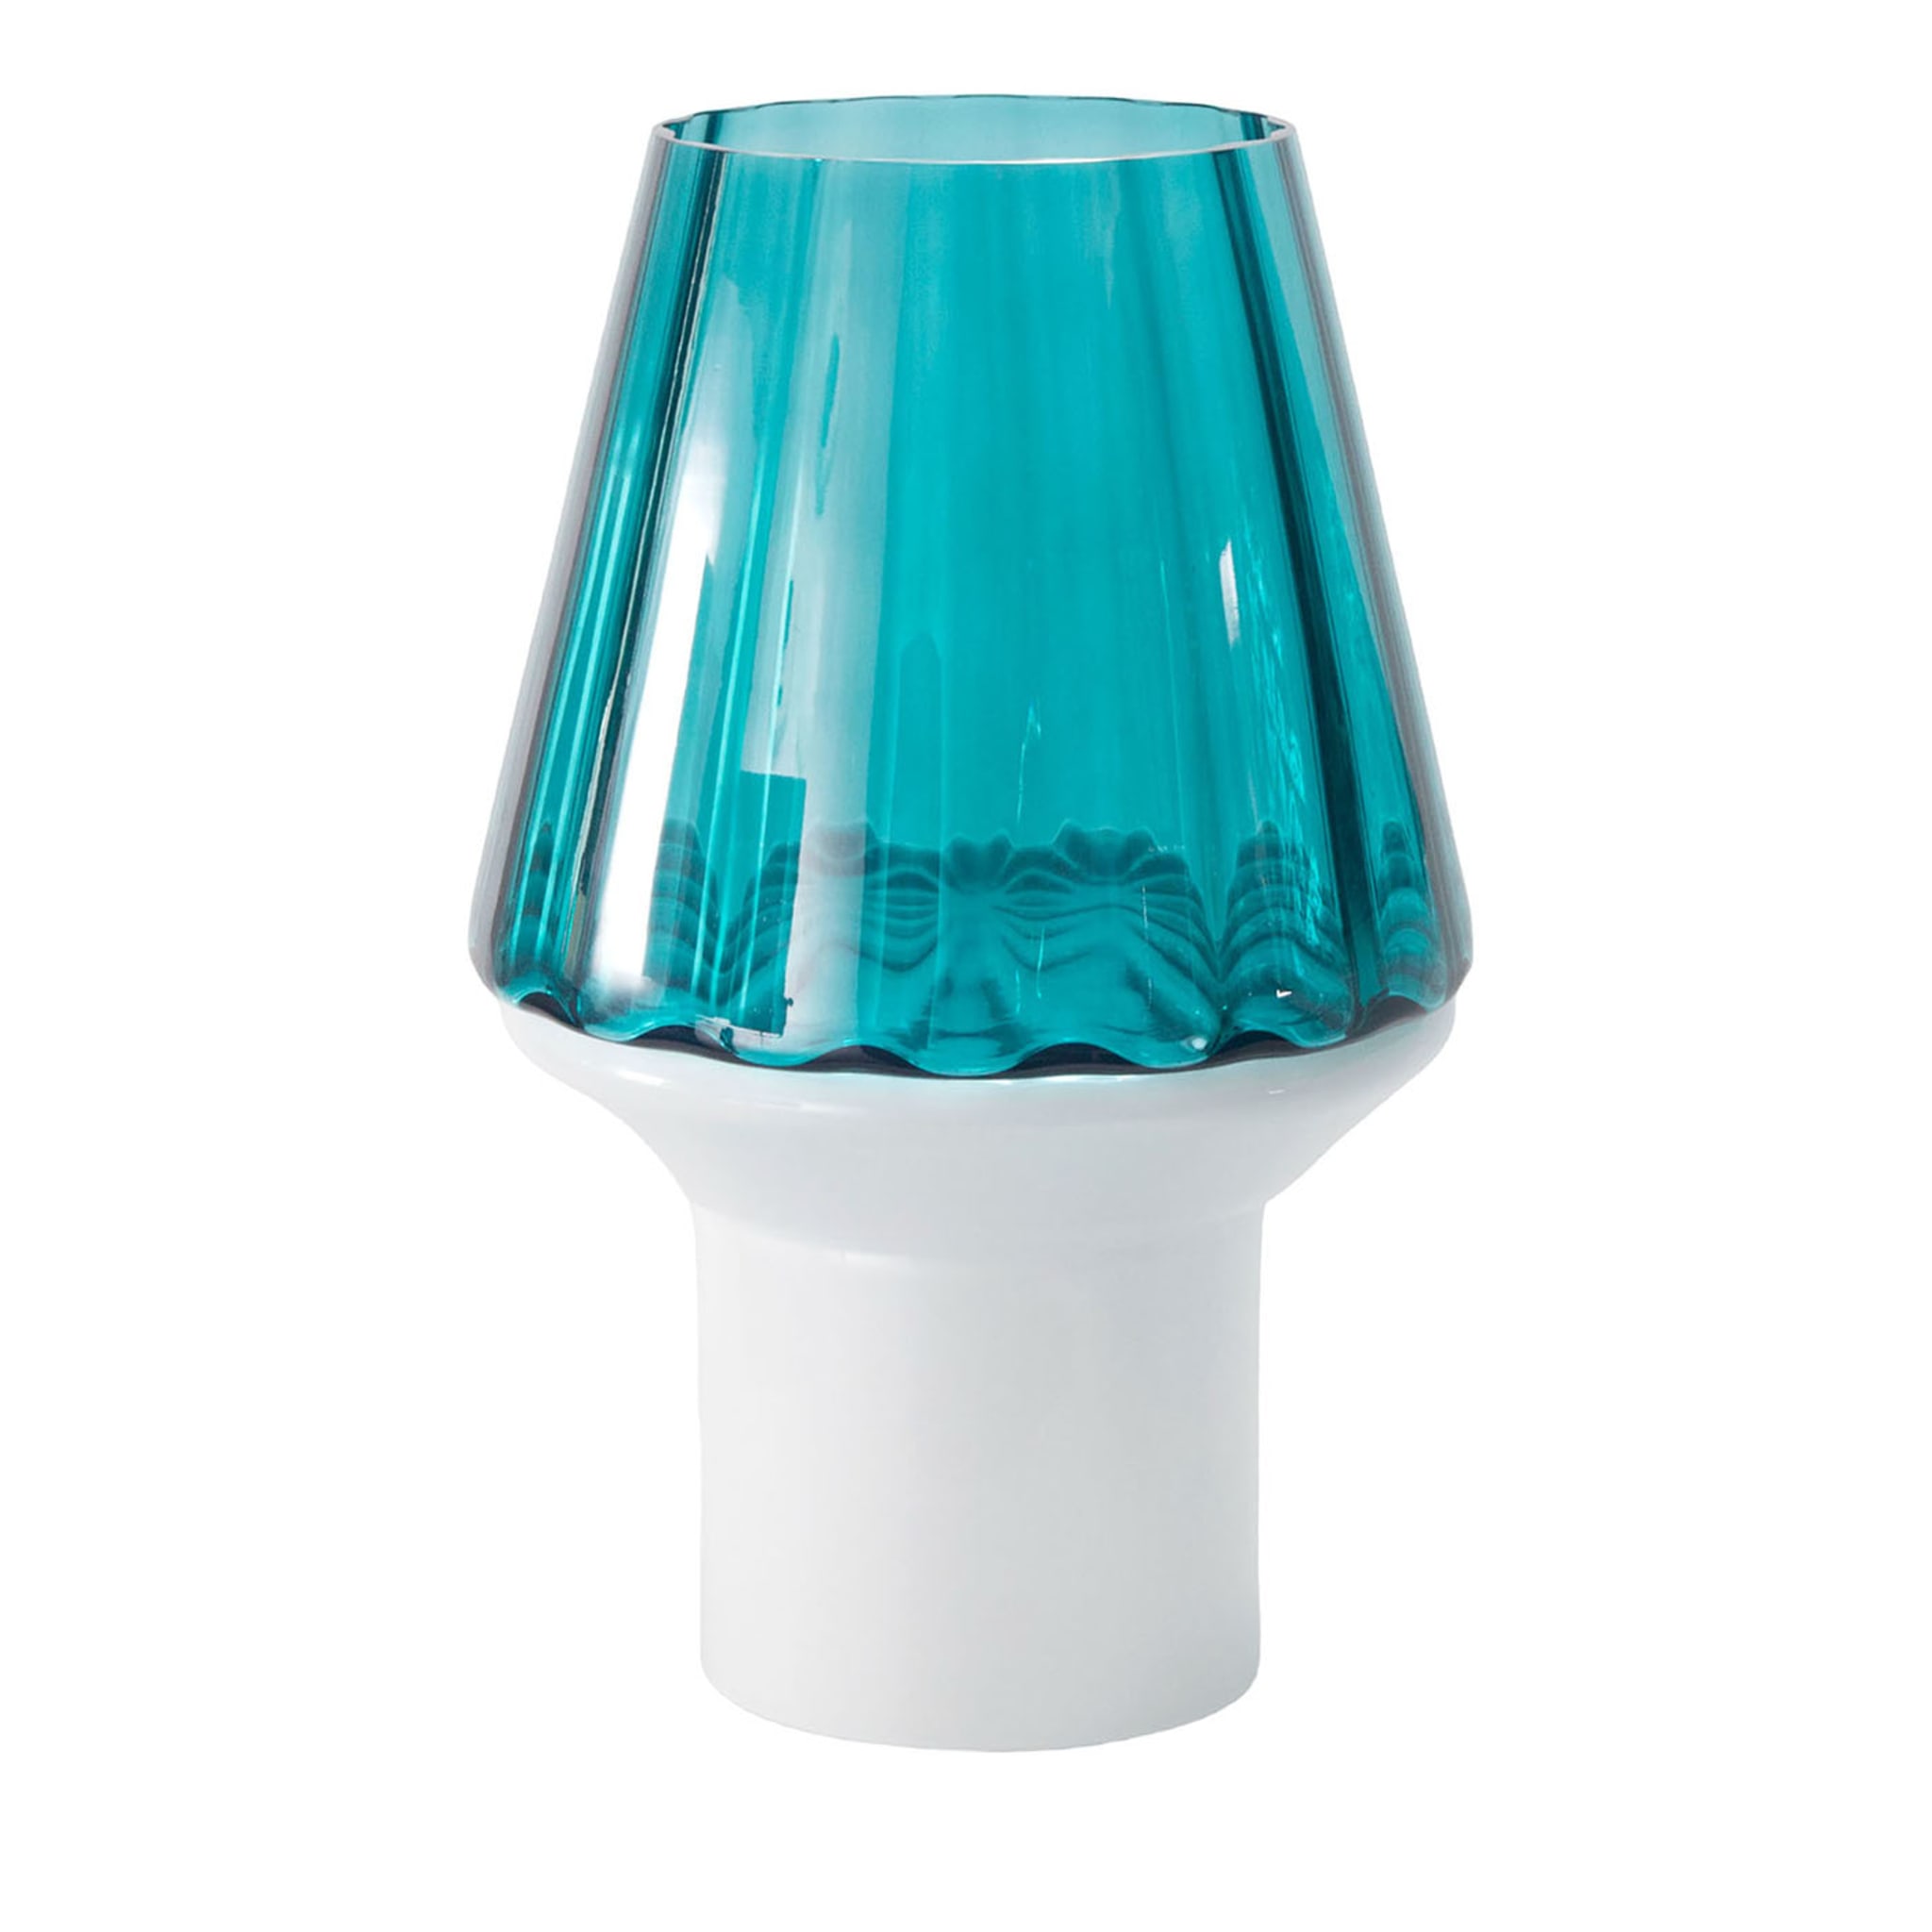 Forest Turquoise Table Lamp by Romani Saccani #1 - Main view